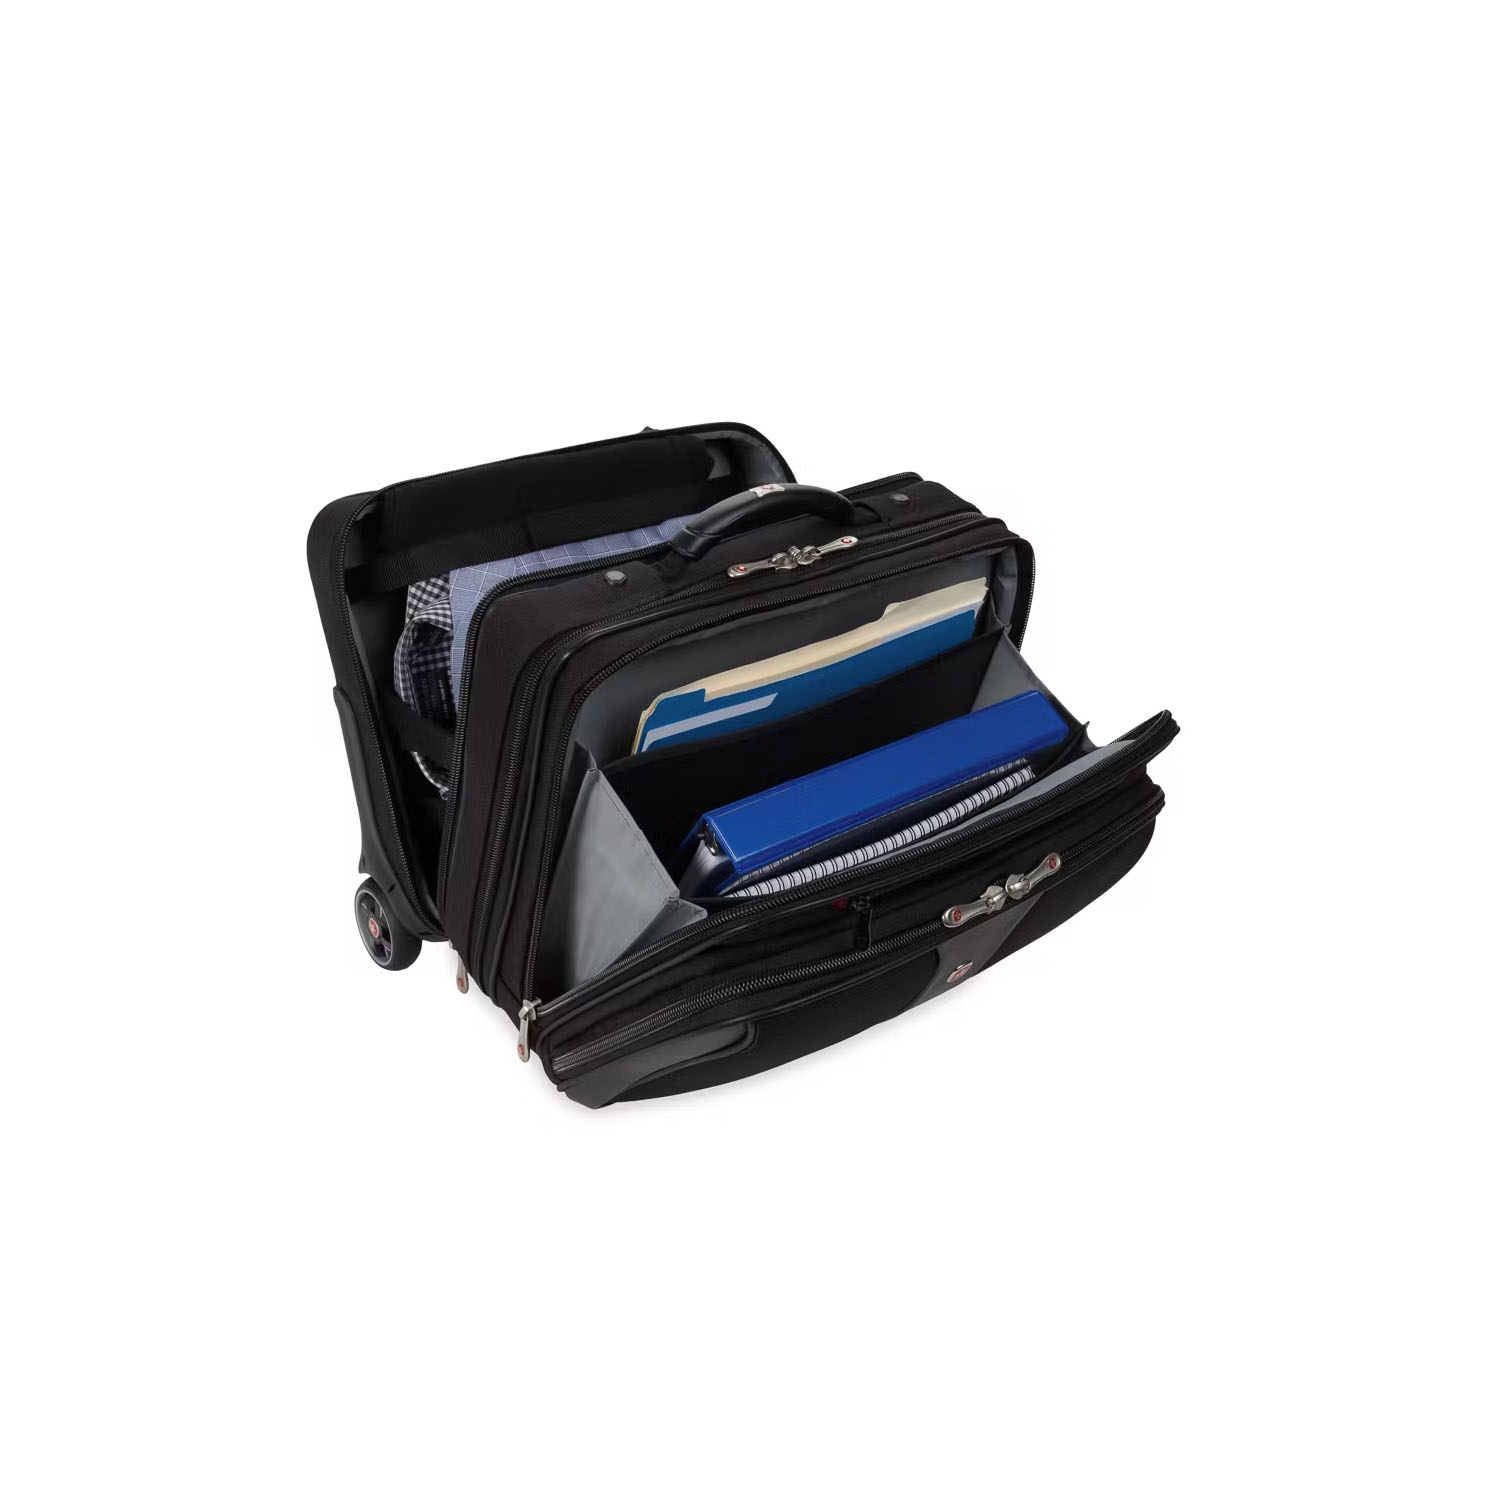 WENGER Patriot Wheeled Business Case with Removable Laptop Case - Black